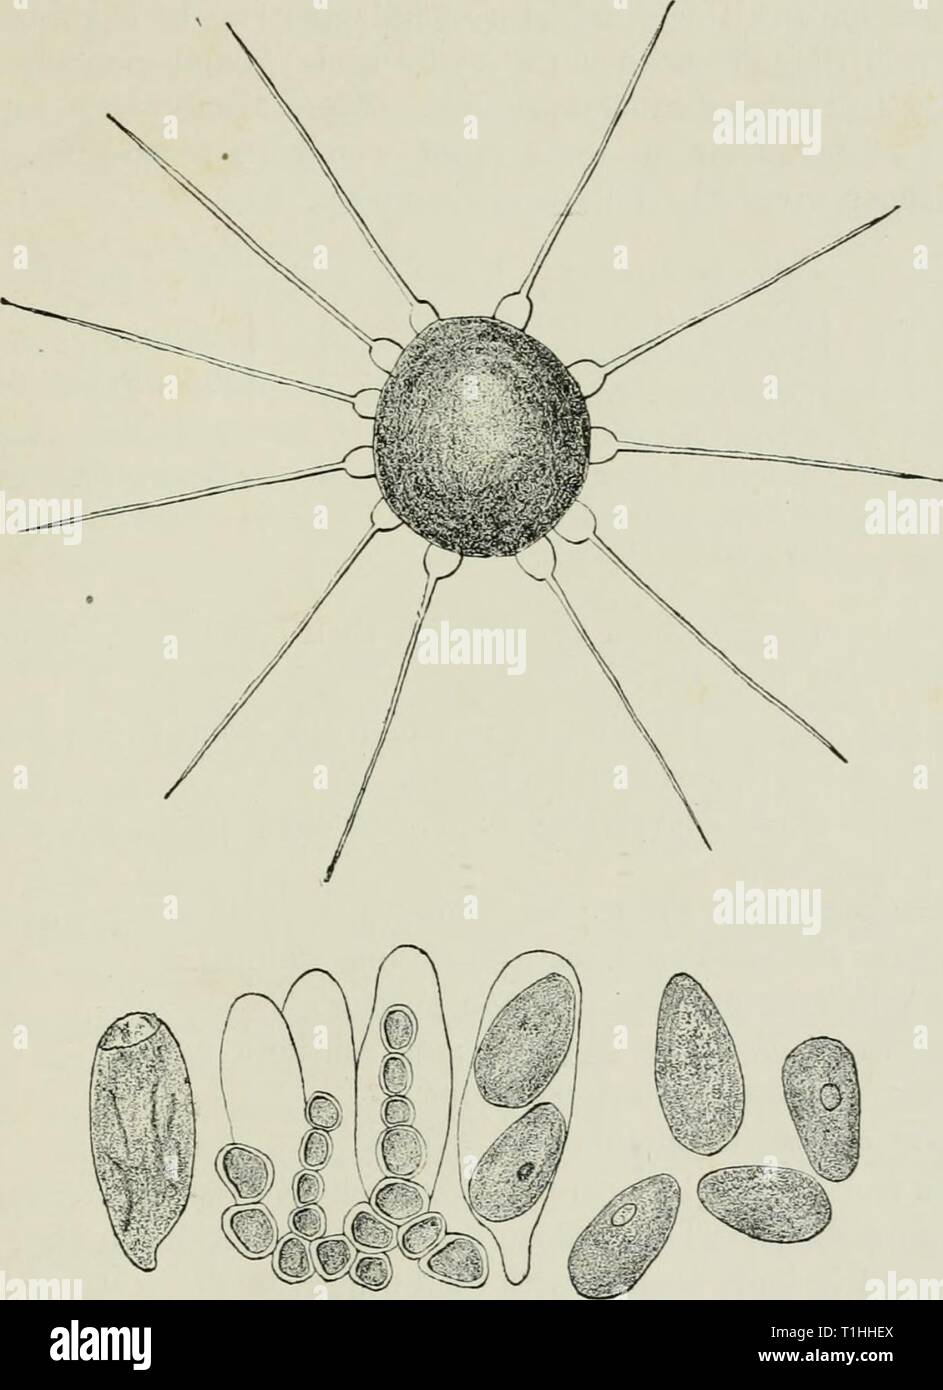 Diseases of plants induced by Diseases of plants induced by cryptogamic parasites; introduction to the study of pathogenic Fungi, slime-Fungi, bacteria, & Algae  diseasesofplant00tube Year: 1897  PERISPORIEAE. 179 Aspergillus, Pcnicilliuin, Zopfia, Fc/'isjjonurn, Lasiubotnjs, Apio- sporiiitn, Capnodiuiii, AsUriiia, Microthyrium. To this sub-division of the Perisporiaceae belong some com- mon forms of mould-fungi which are generally only saprophytic,    Fig. 7i5.—Phyllacthiia suffulta from Beech. Perithecium, with characteristic appendages. Contents of the perithecium : asci, spores, and chains Stock Photo